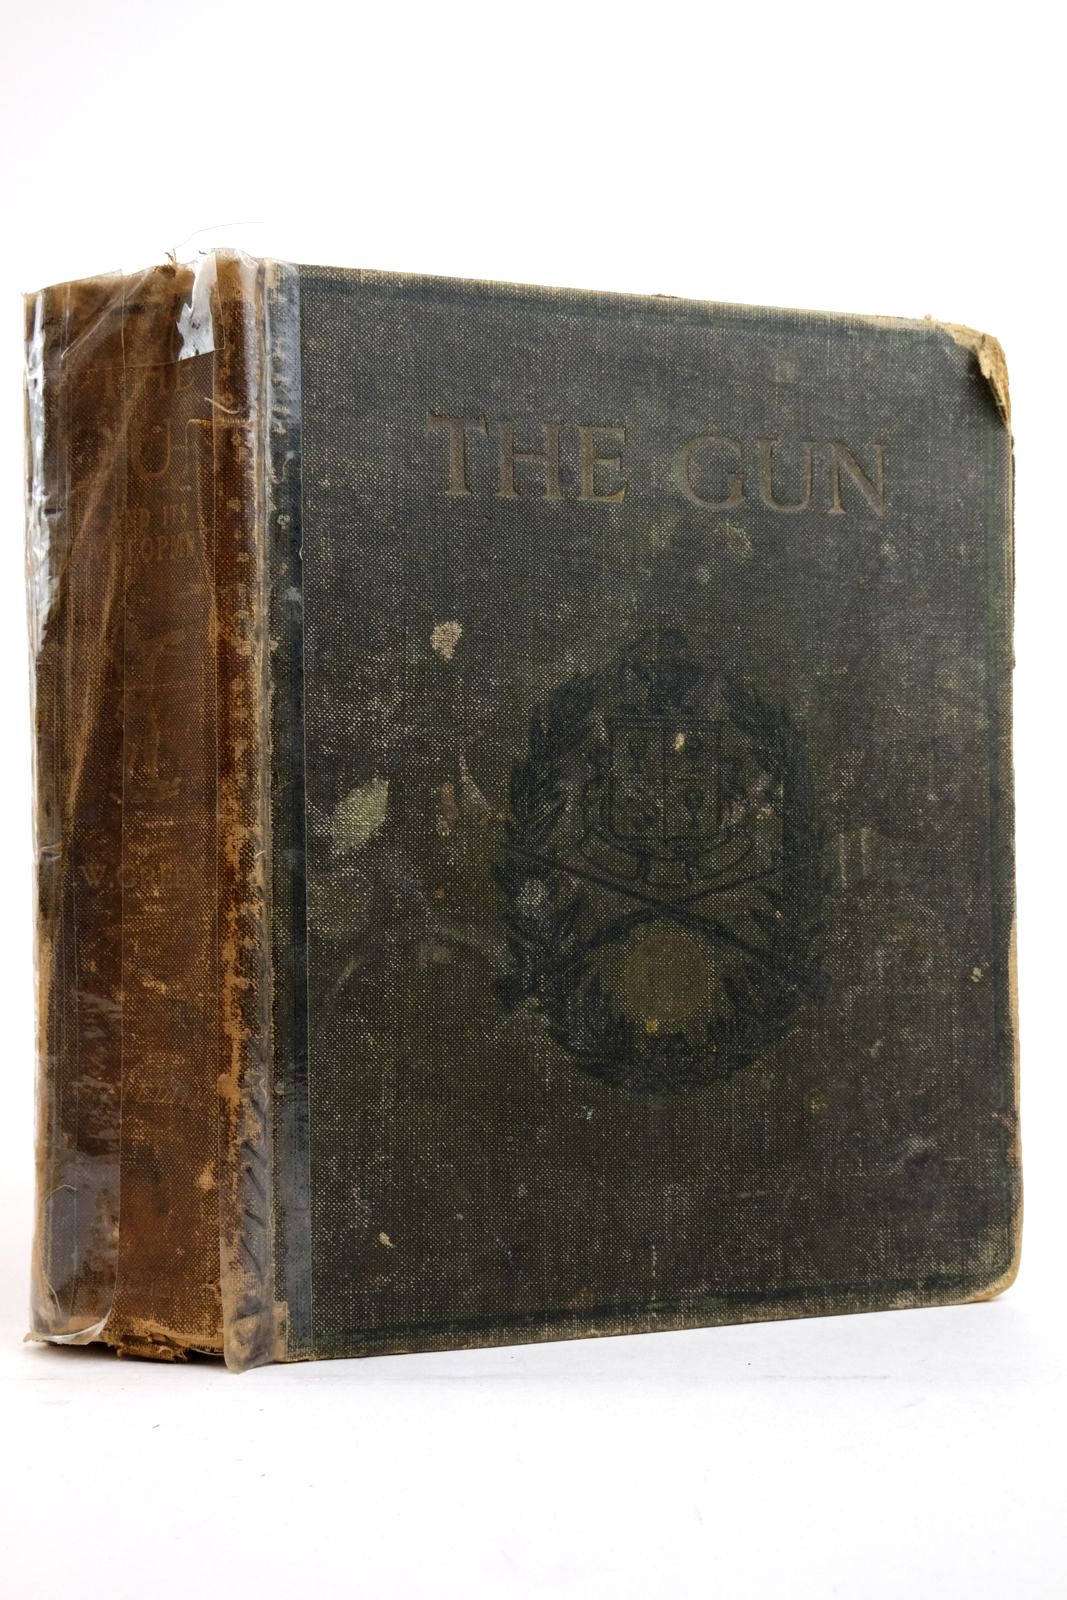 Photo of THE GUN AND ITS DEVELOPMENT written by Greener, W.W. published by Cassell & Company Limited (STOCK CODE: 2135885)  for sale by Stella & Rose's Books